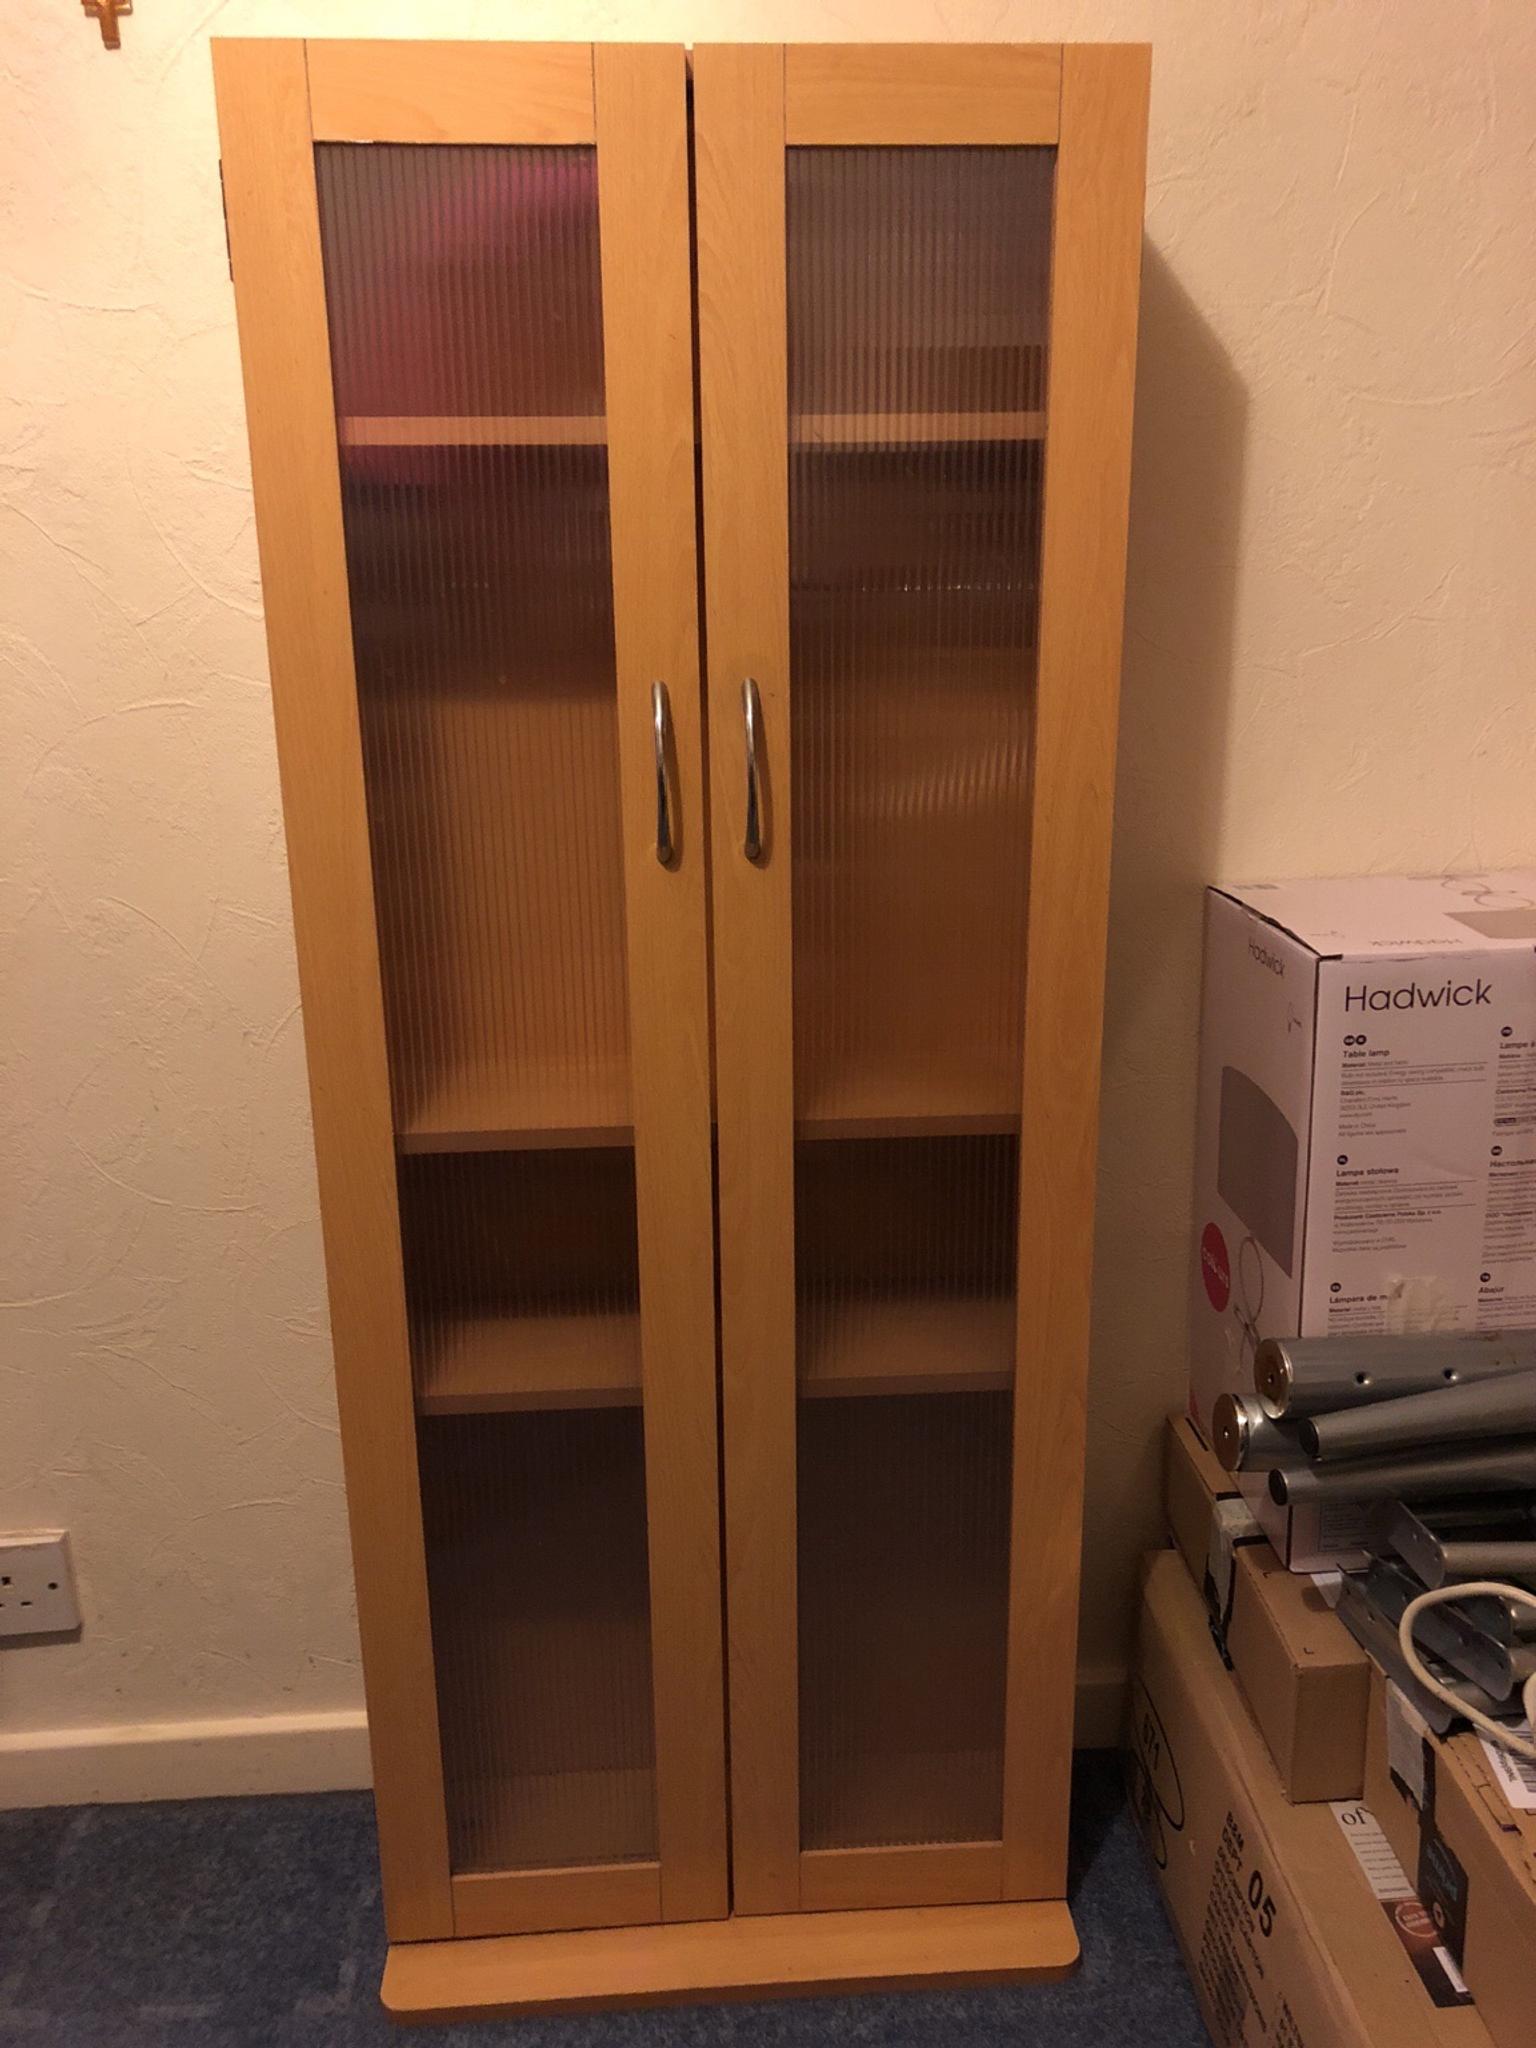 Reduced Cd Dvd Storage Cabinet In Wf4 Wakefield For 10 00 For